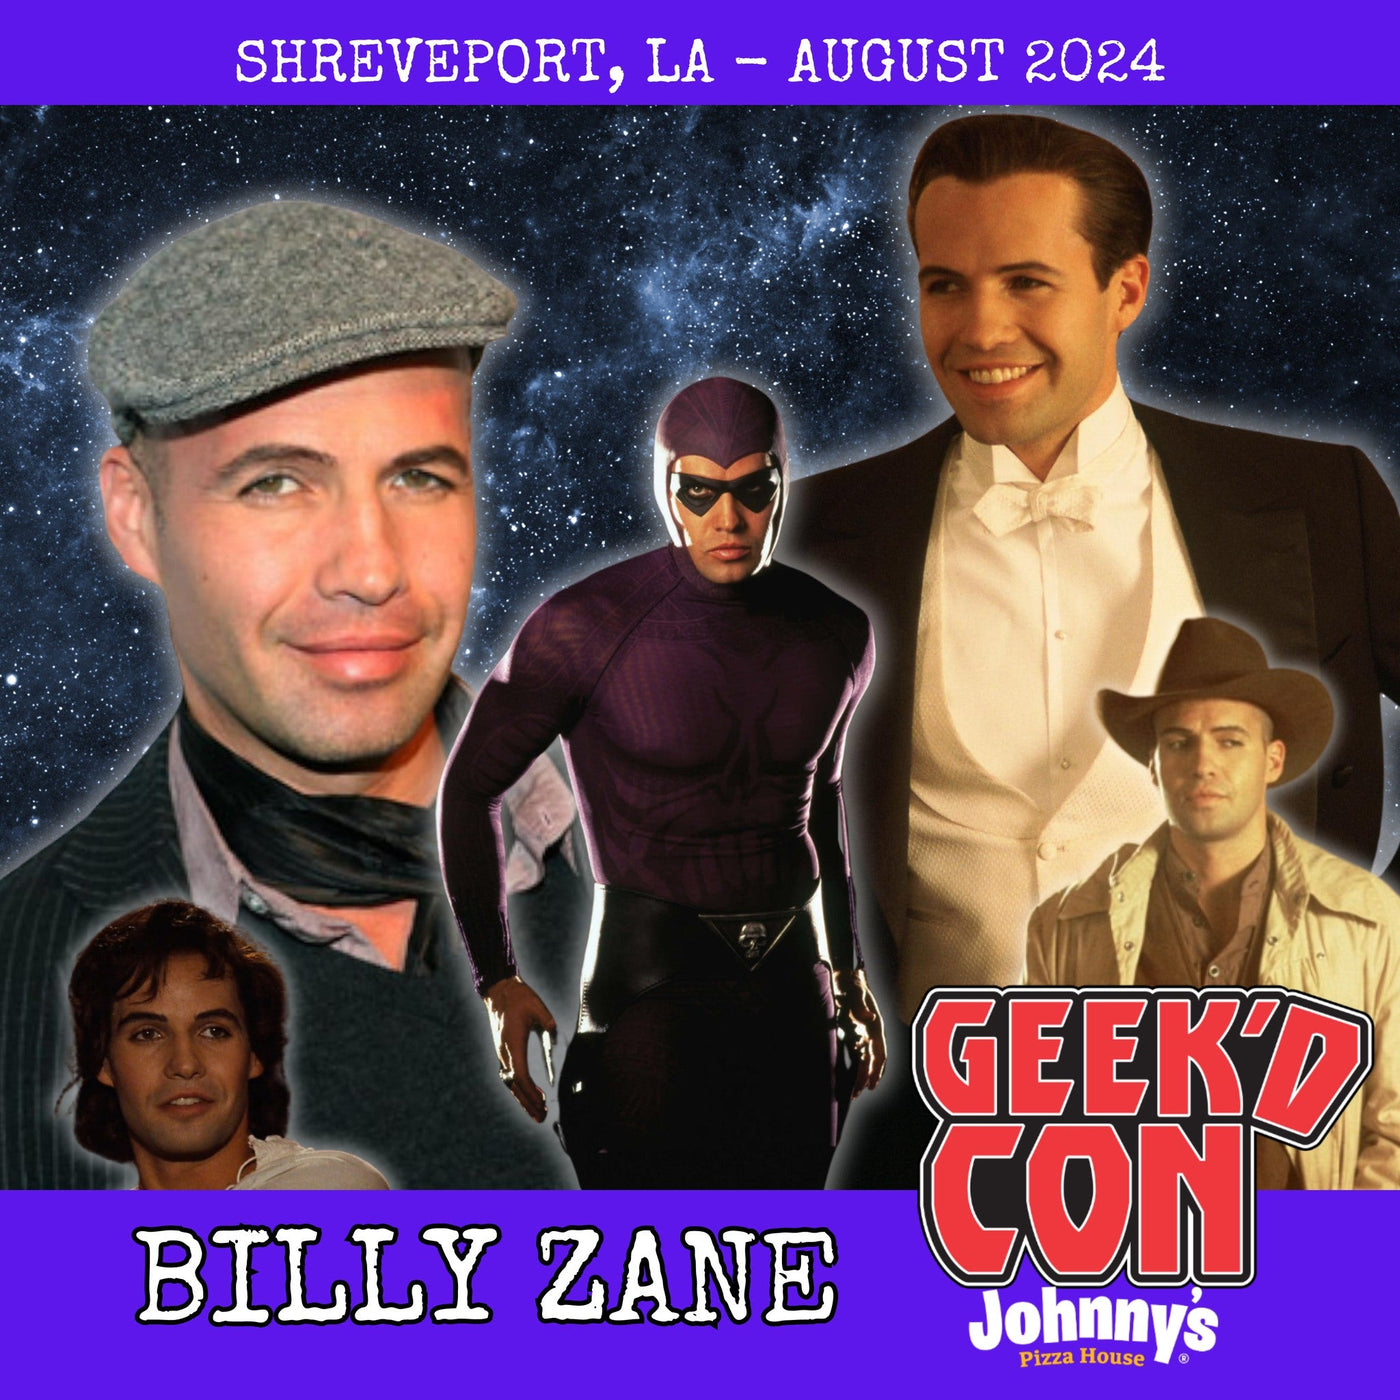 Billy Zane Official Autograph Mail-In Service - Geek'd Con 2024